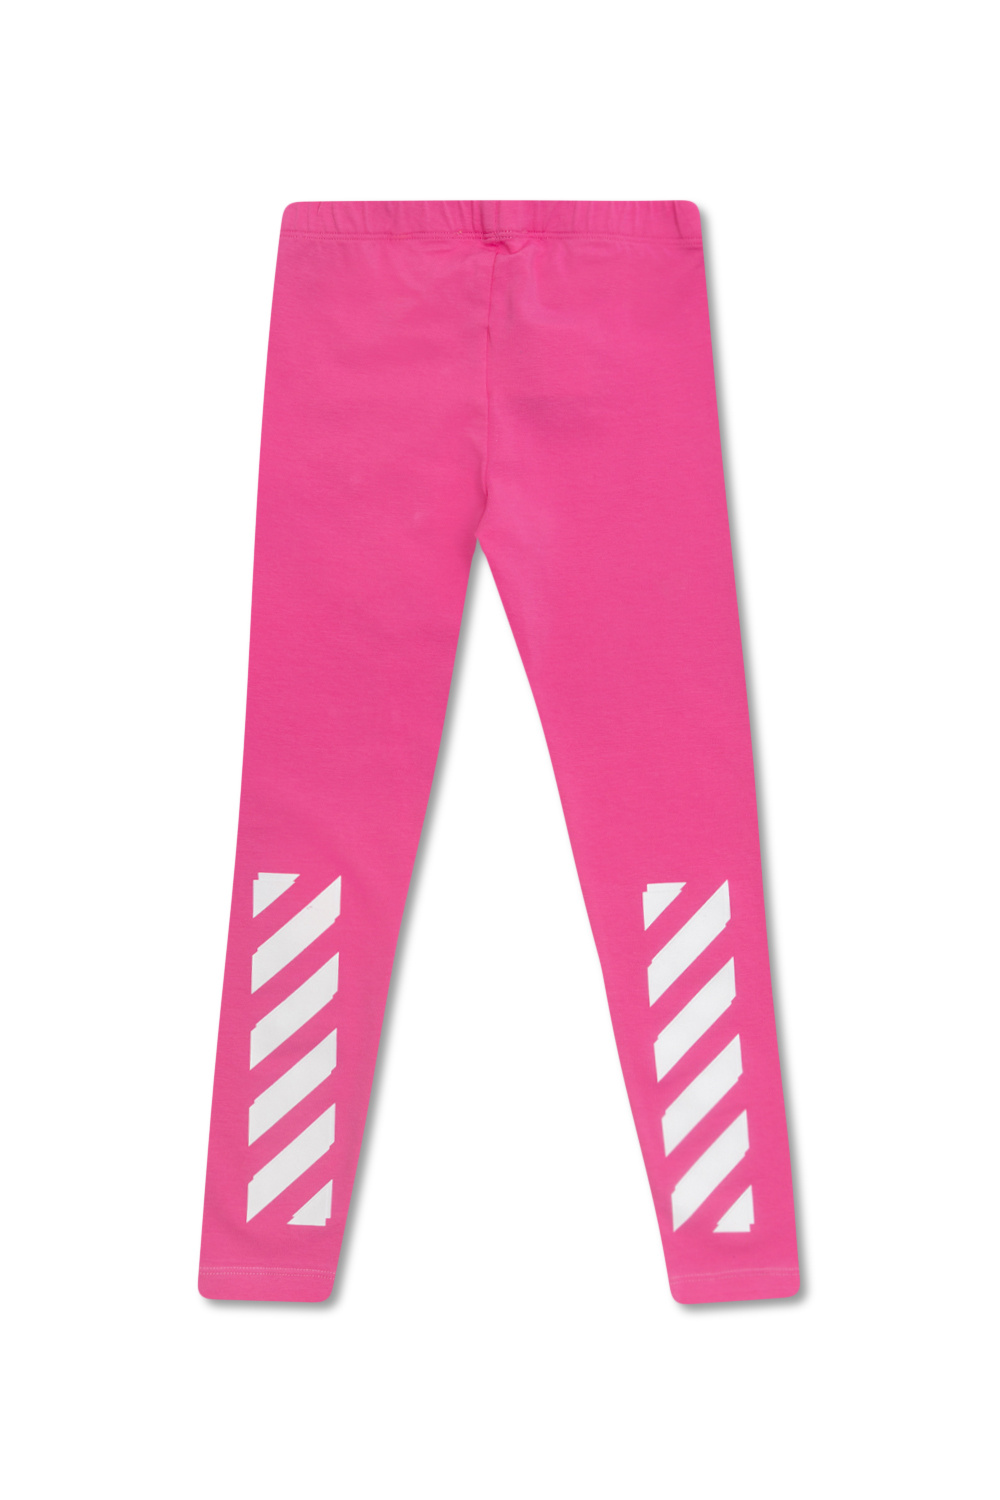 Off-White Kids raf simons flared pressed crease trousers item